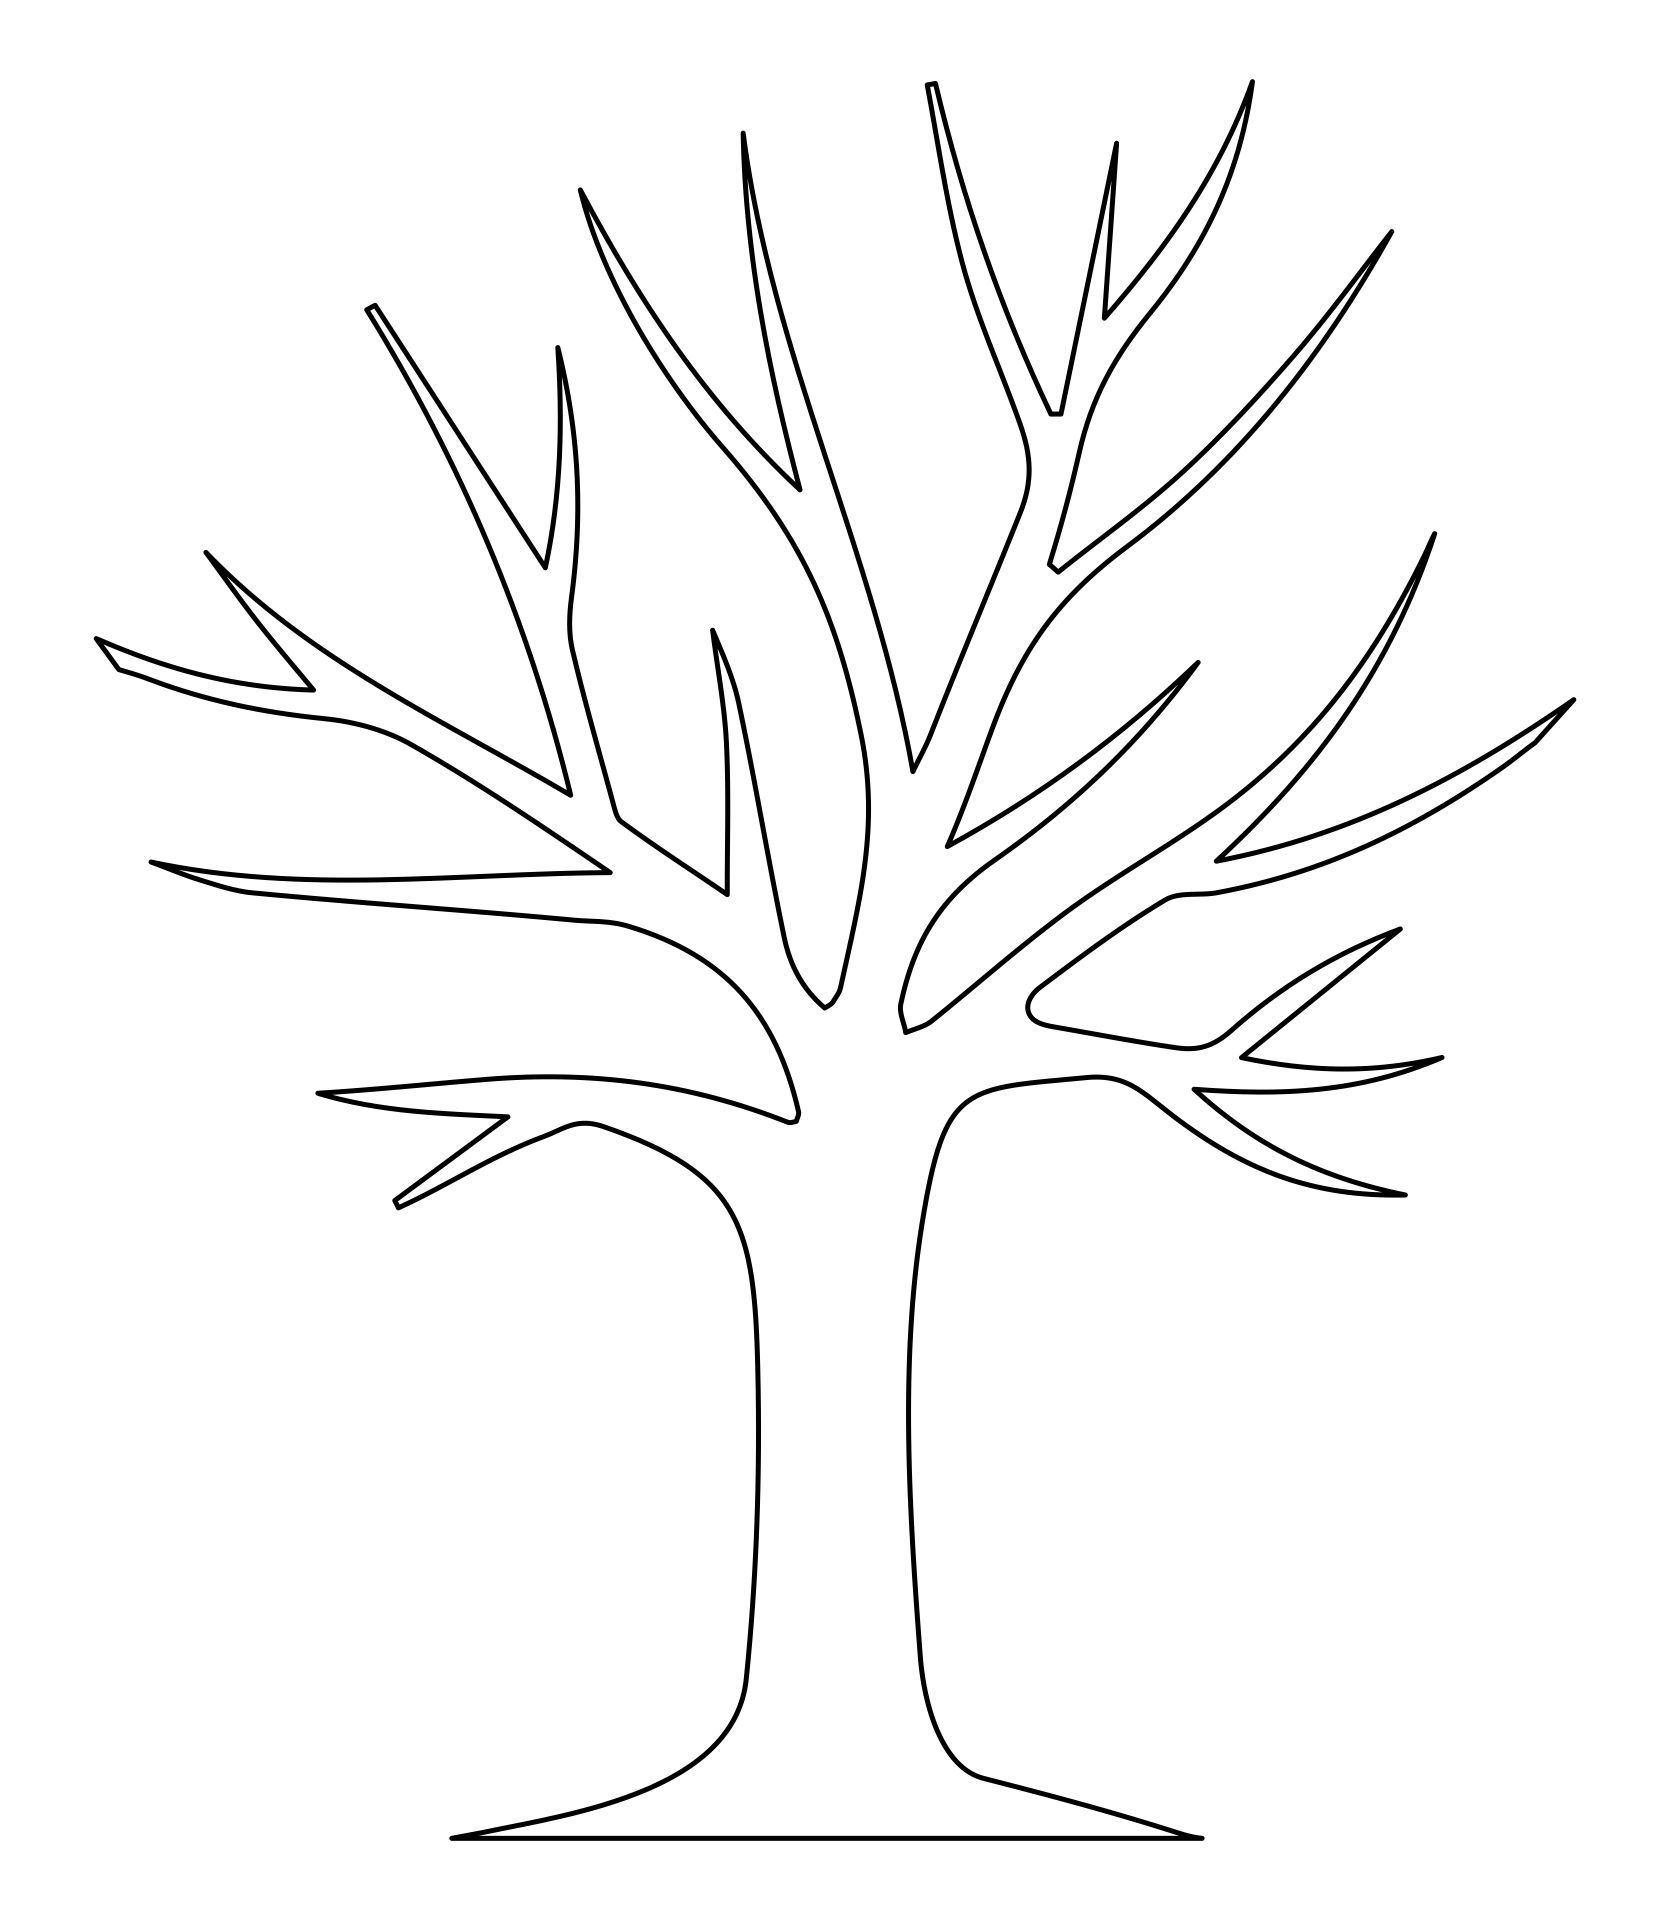 10 Best Tree Branches With Printable Pattern | Tree outline, Tree printable  free, Tree branches